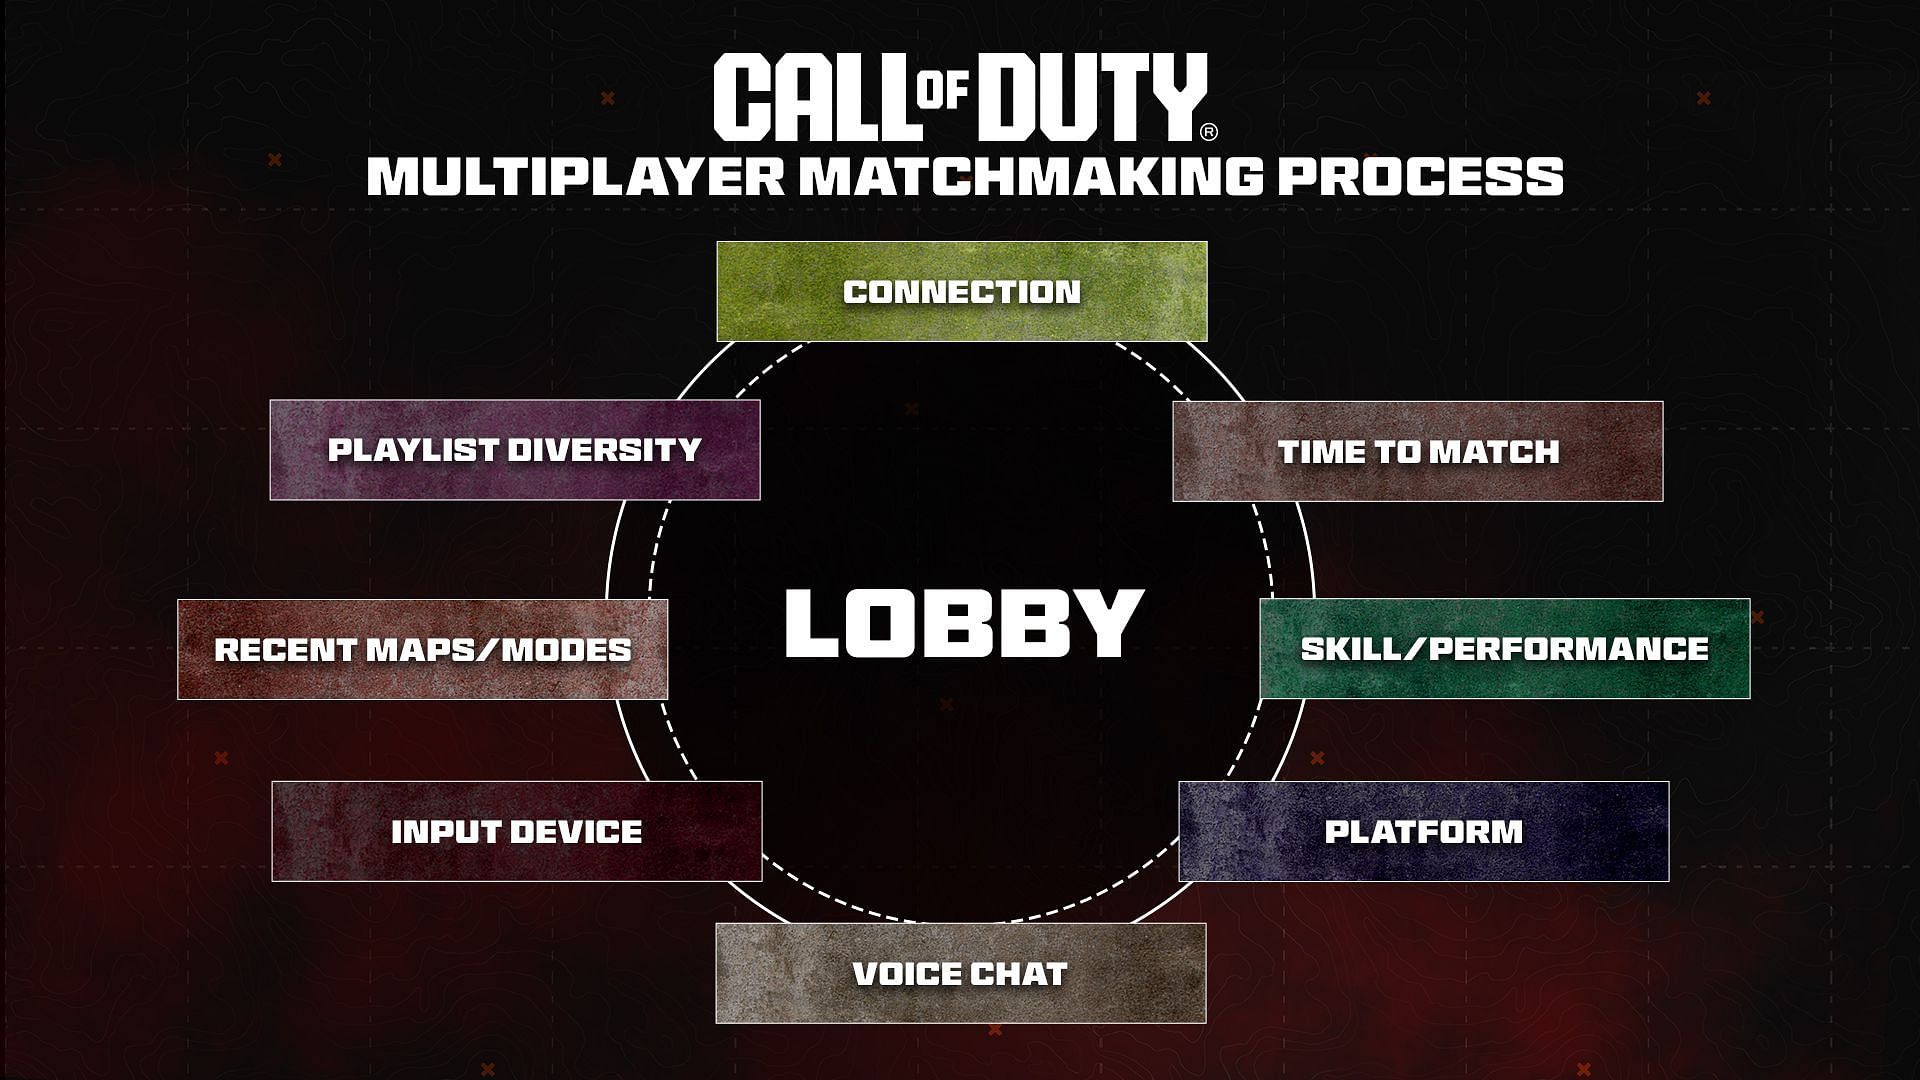 Call of Duty matchmaking process details (Image via Activision)